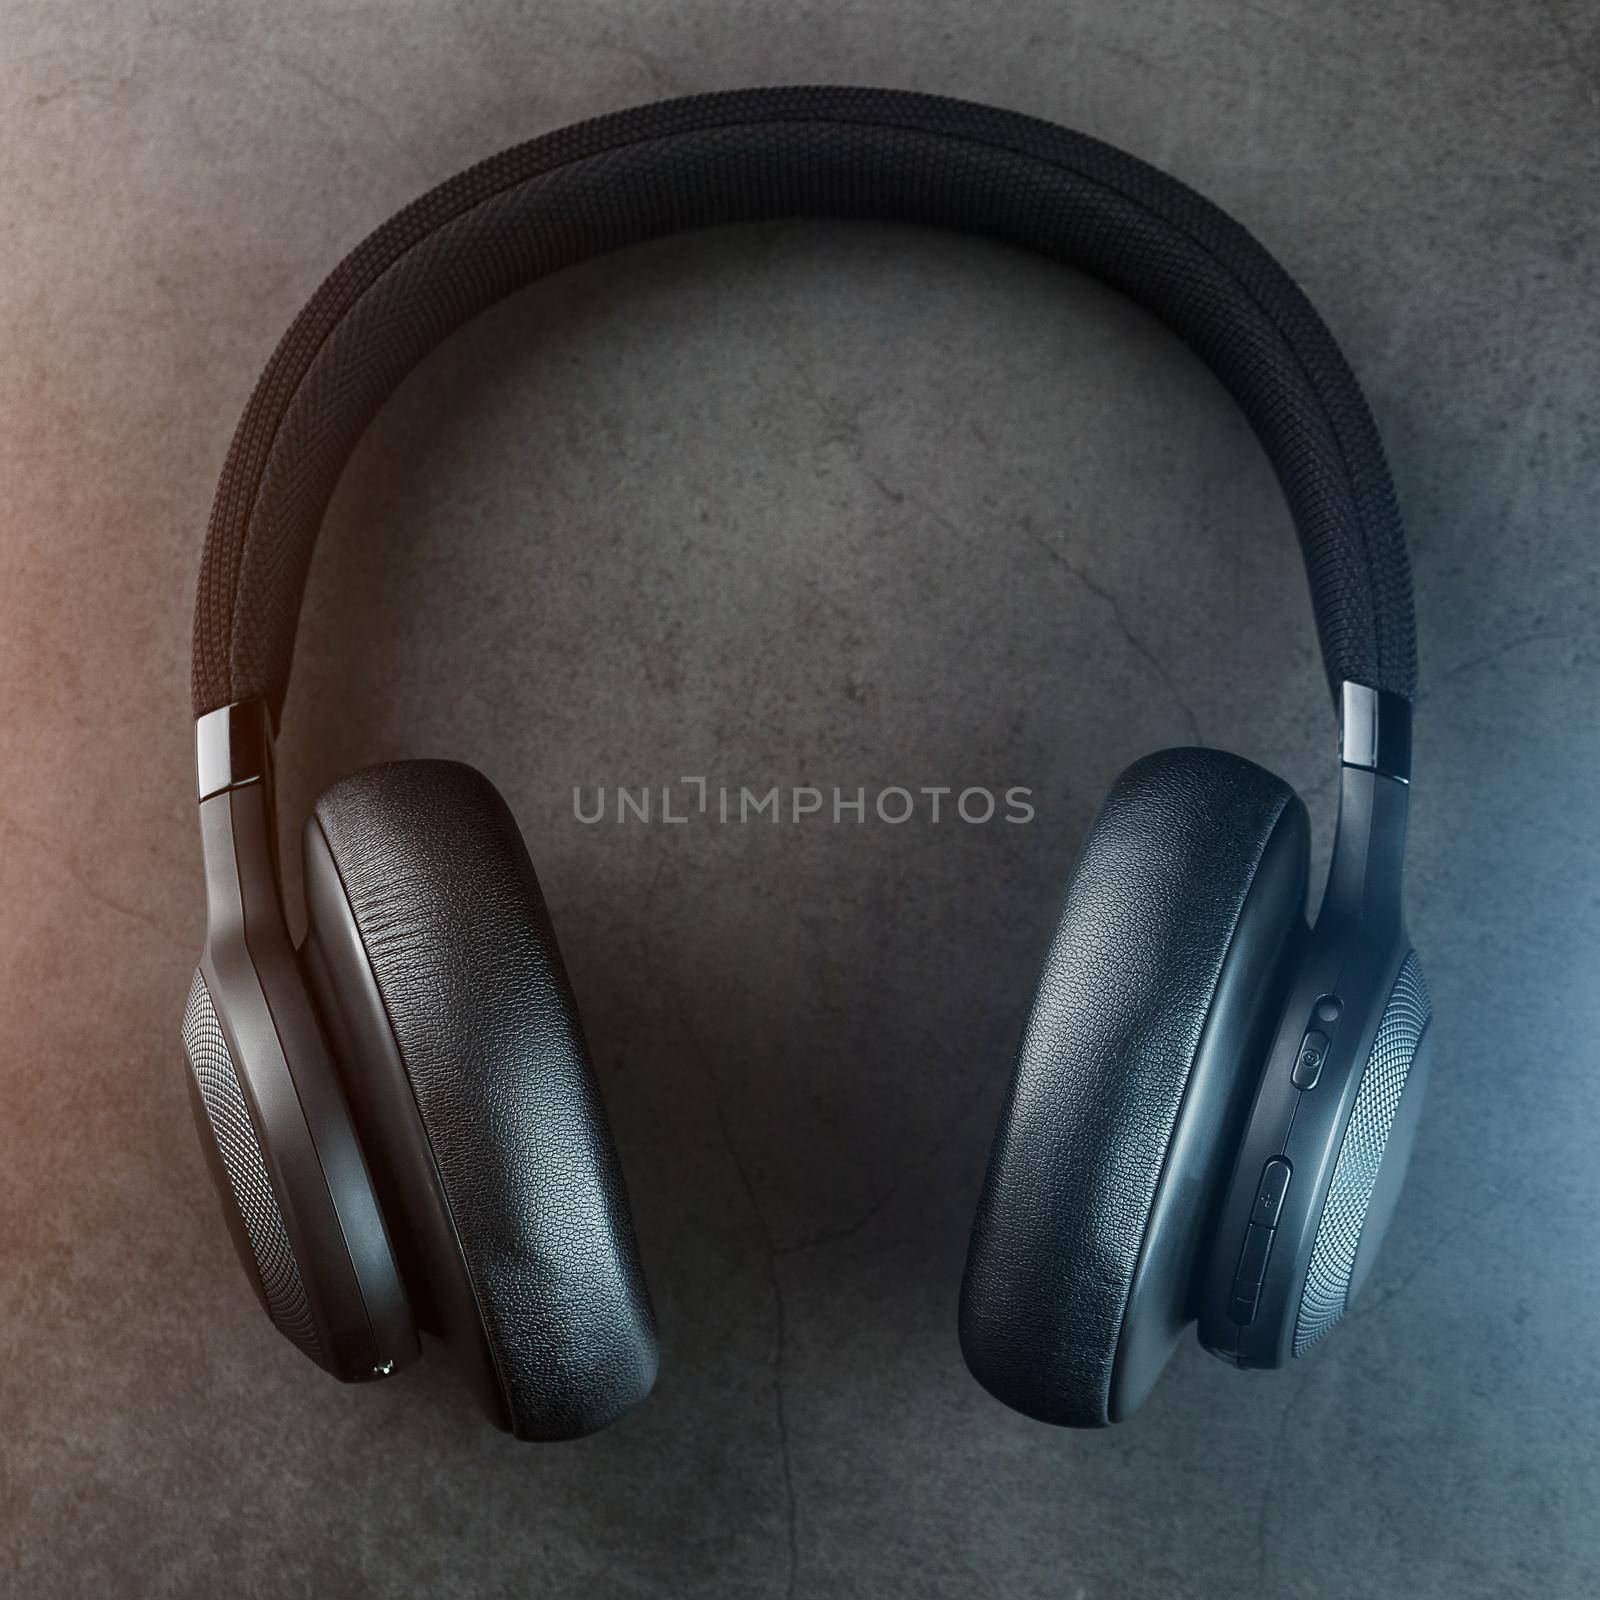 Wireless black headphones on a dark background with blue and orange backlight. On-ear headphones for playing games and listening to music tracks. Modern style